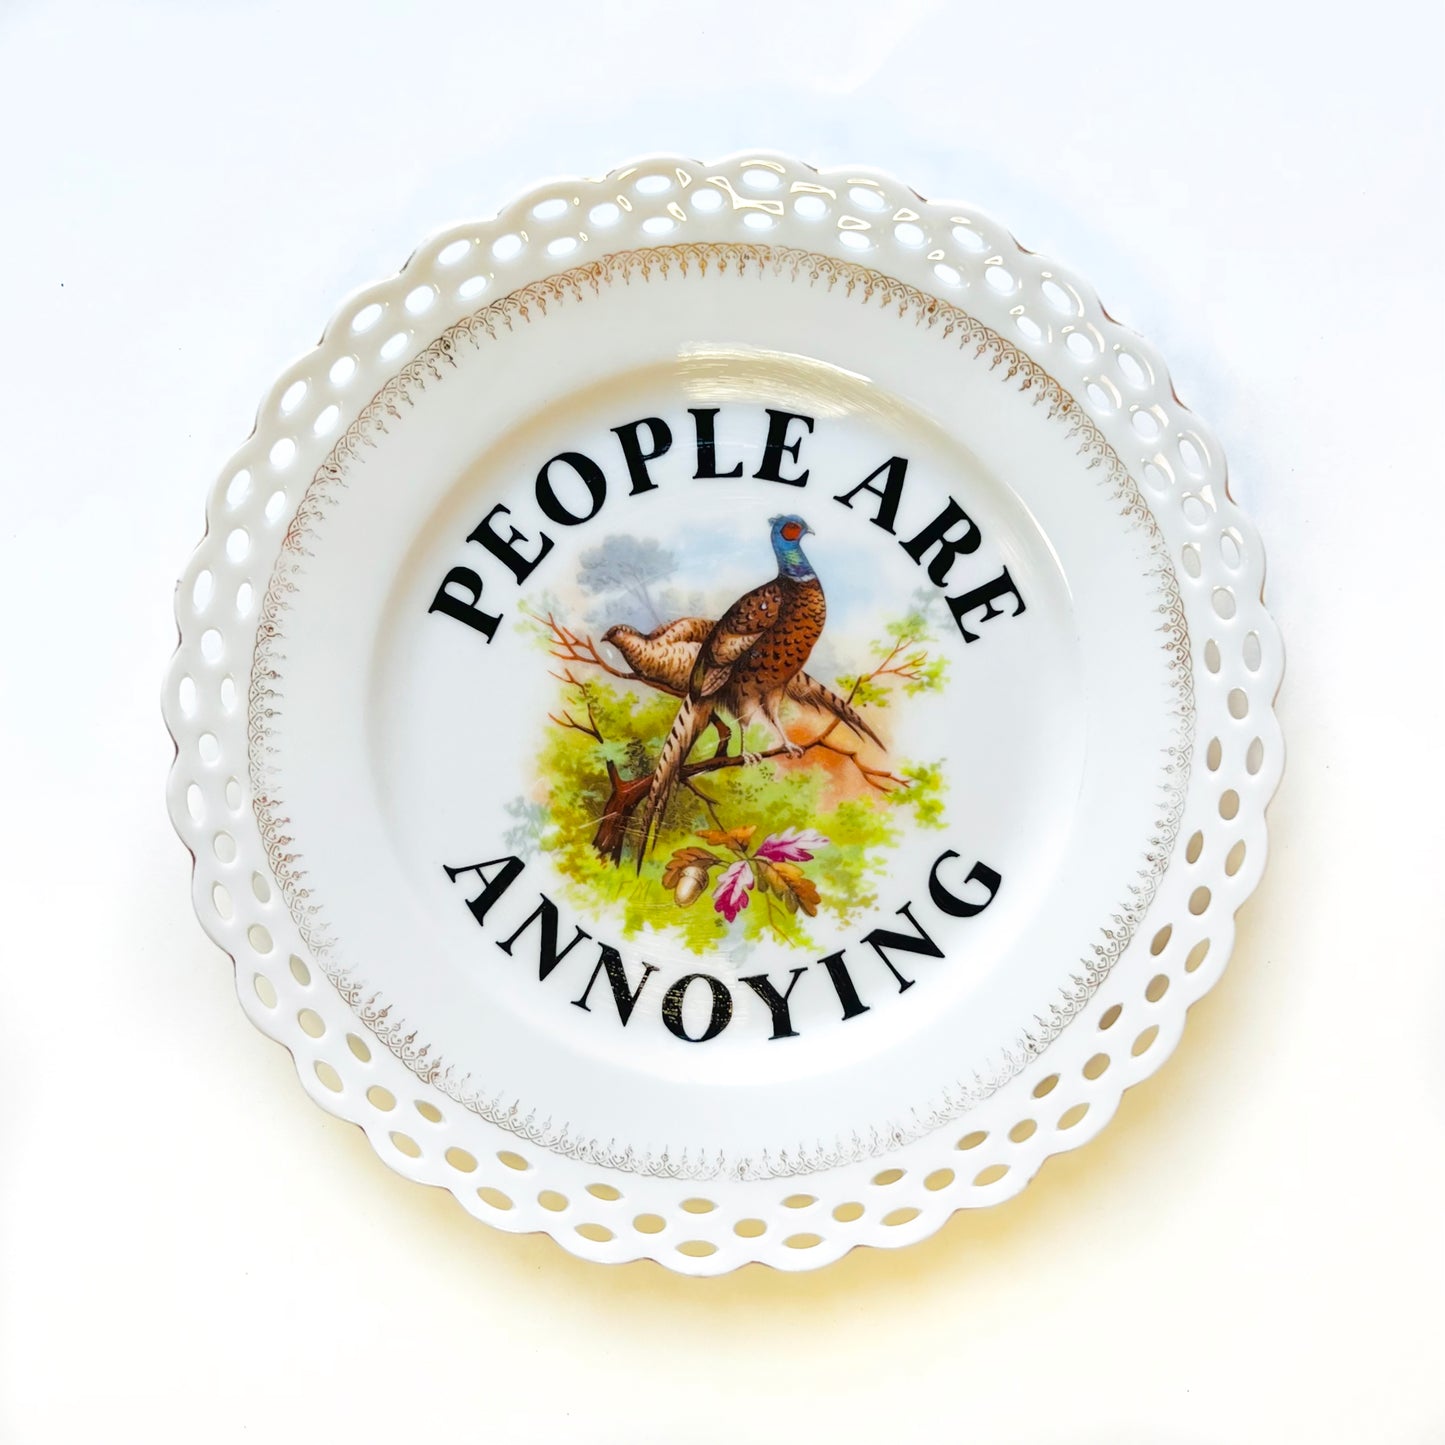  by Marie-Claude Marquis titled Marie-Claude Marquis - "People Are Annoying"